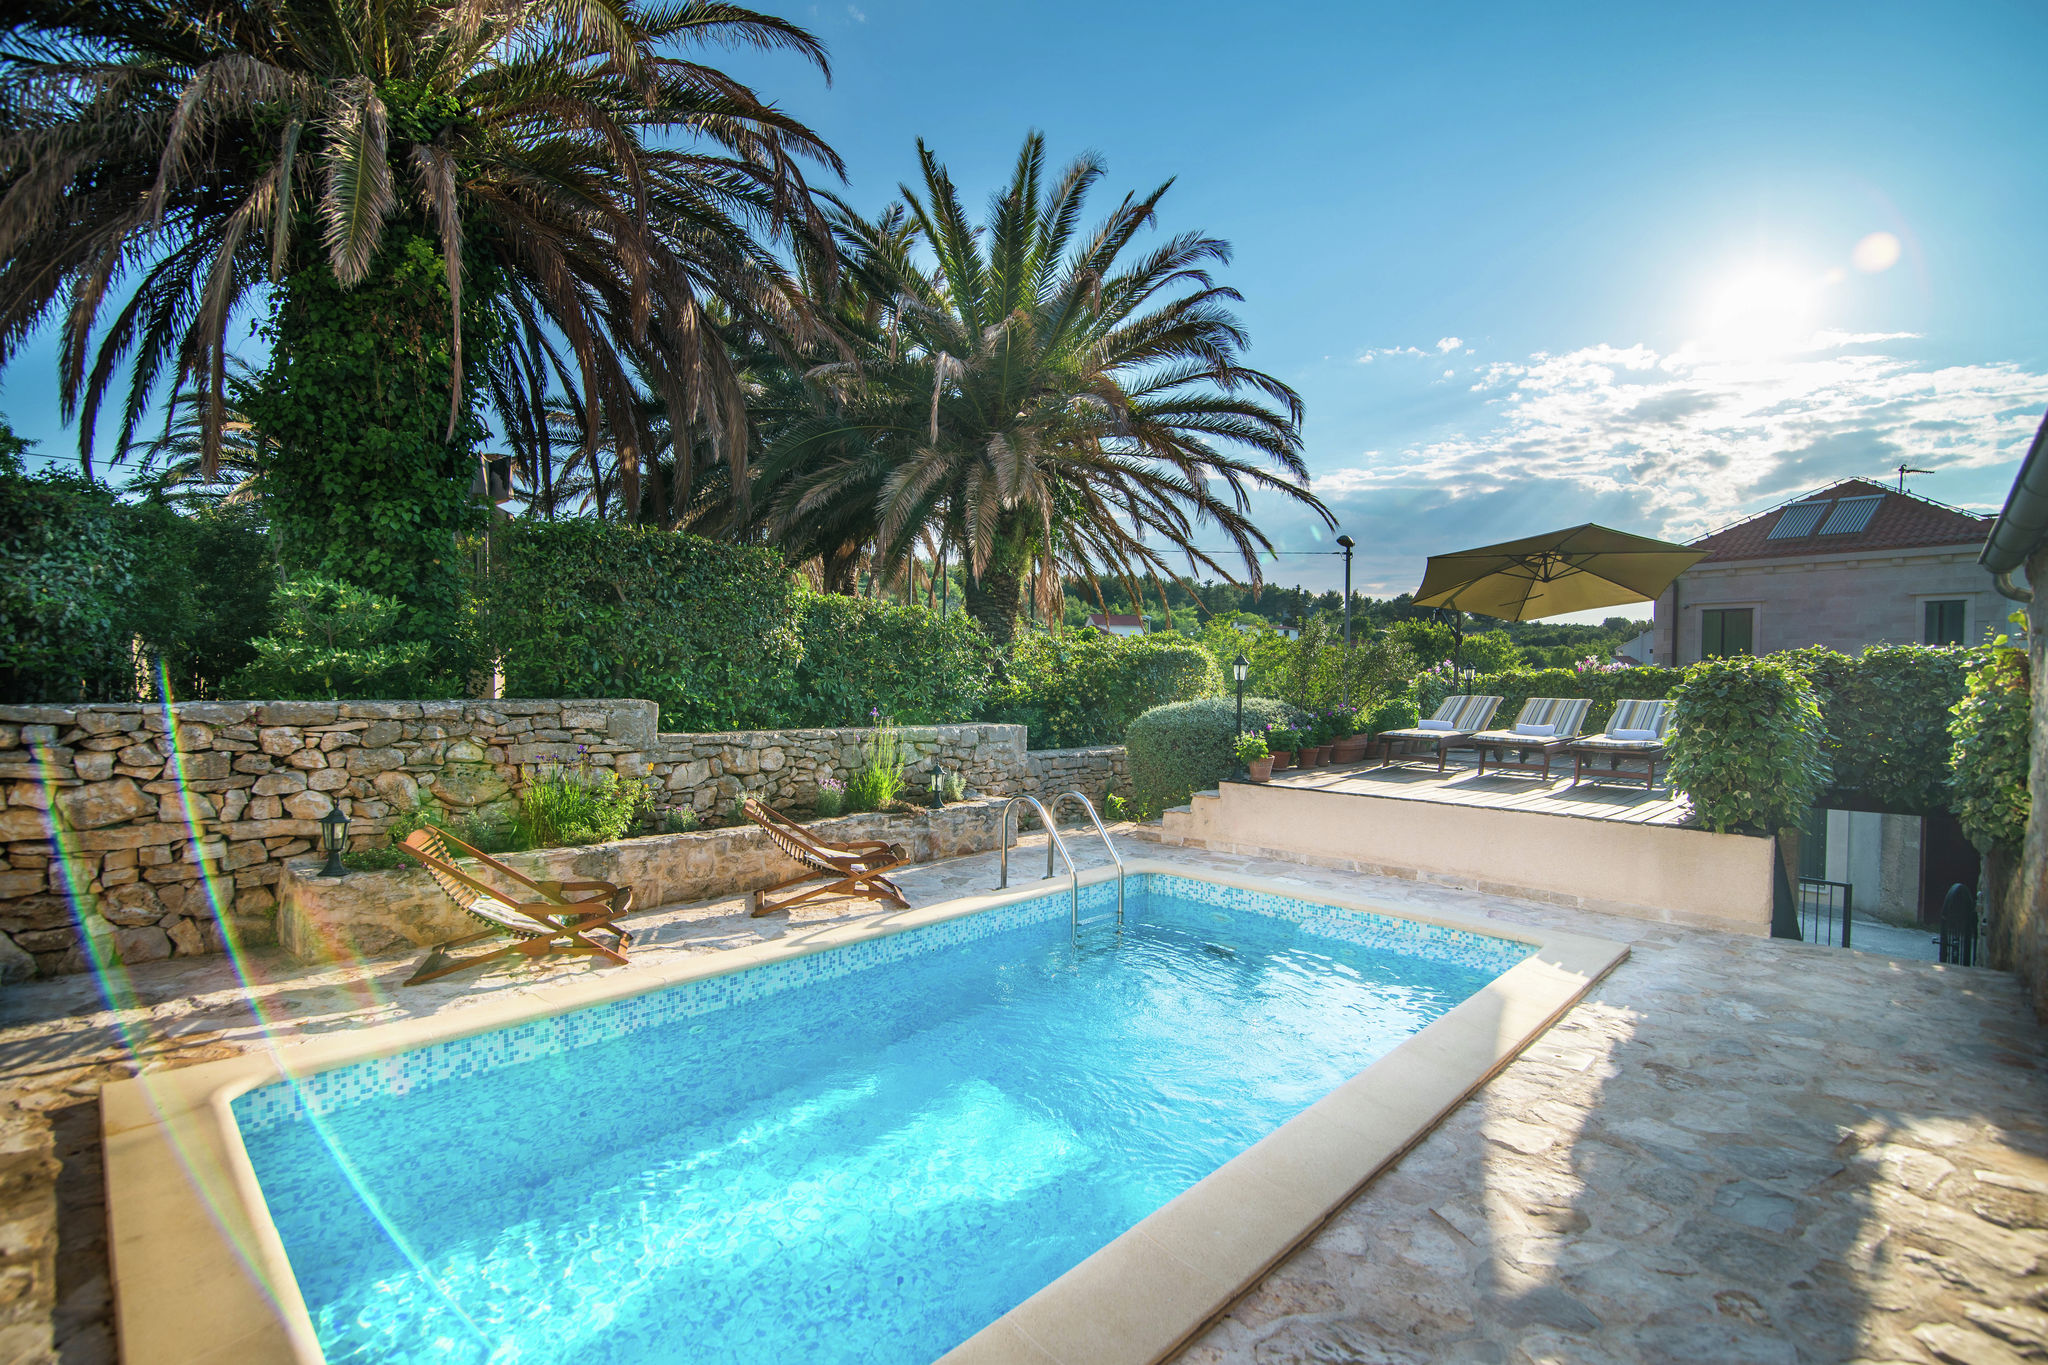 Authentic villa with pool on the island of Brac, 800 m from the beach